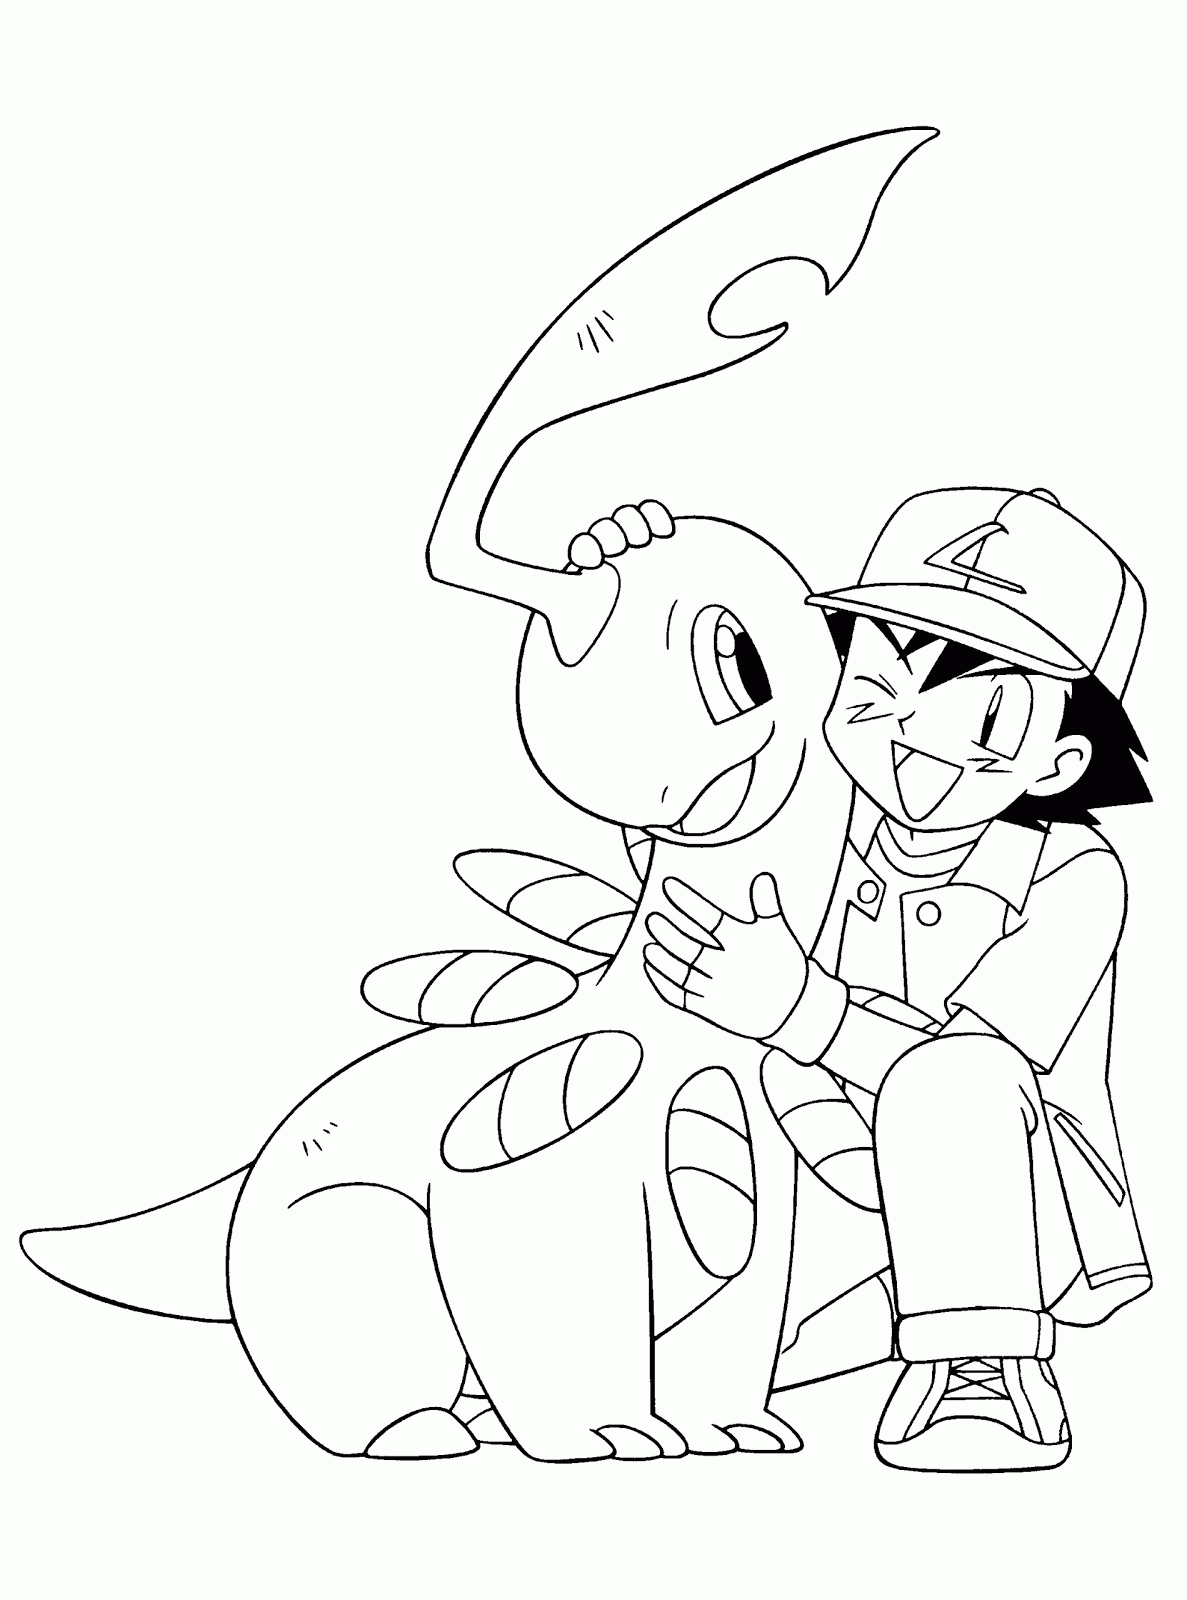 Download Pokemon Characters Black And White Coloring Pages ...